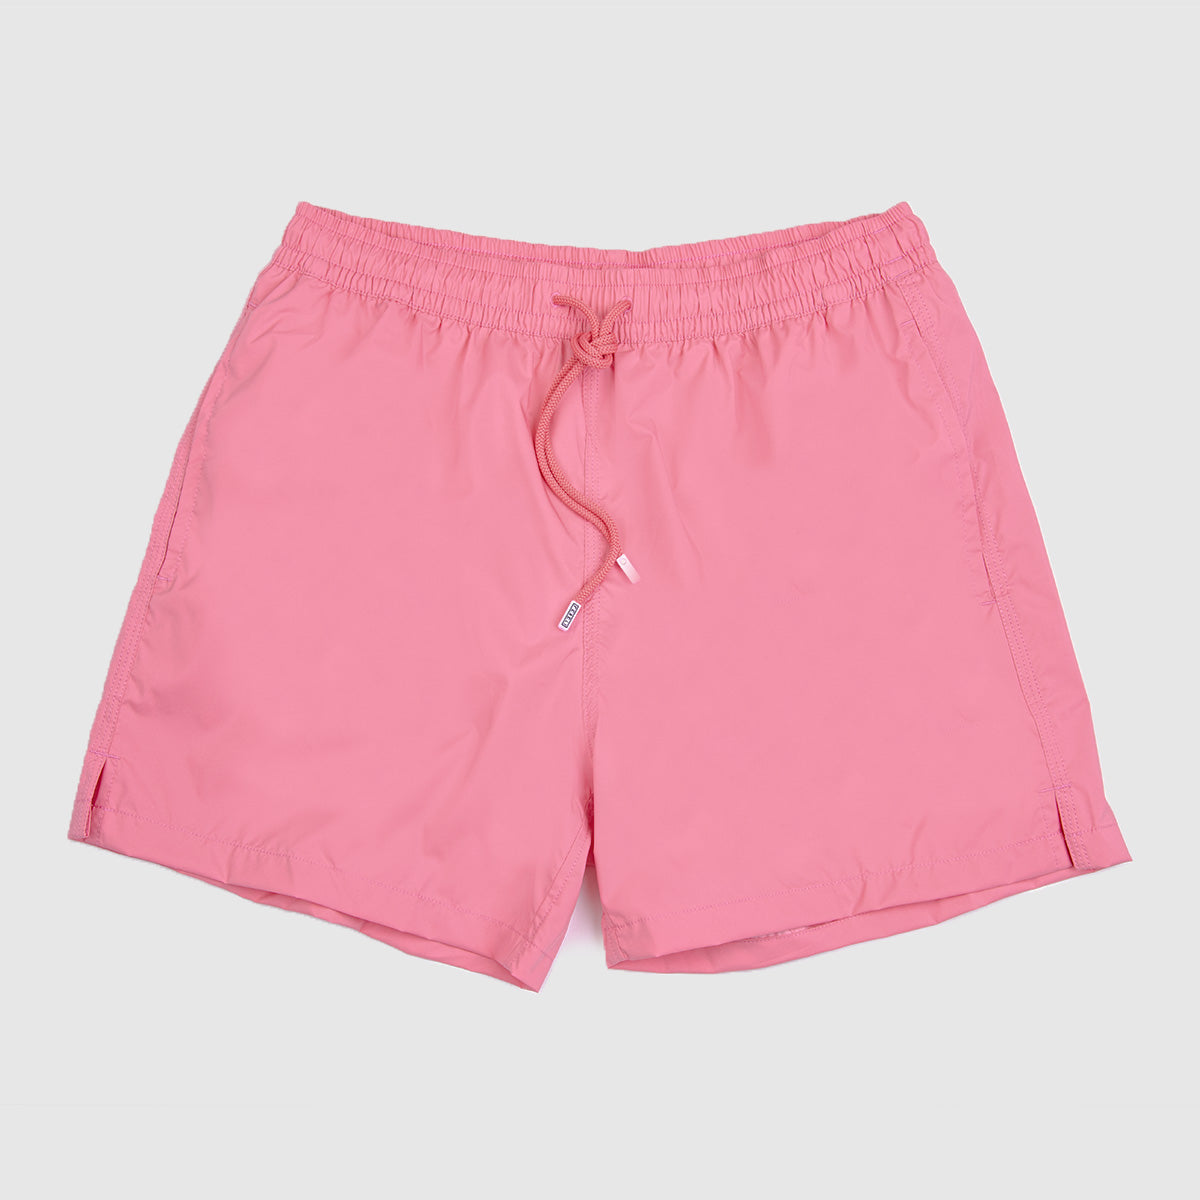 Madeira Solid Color Swim Trunk - Hotpink 115